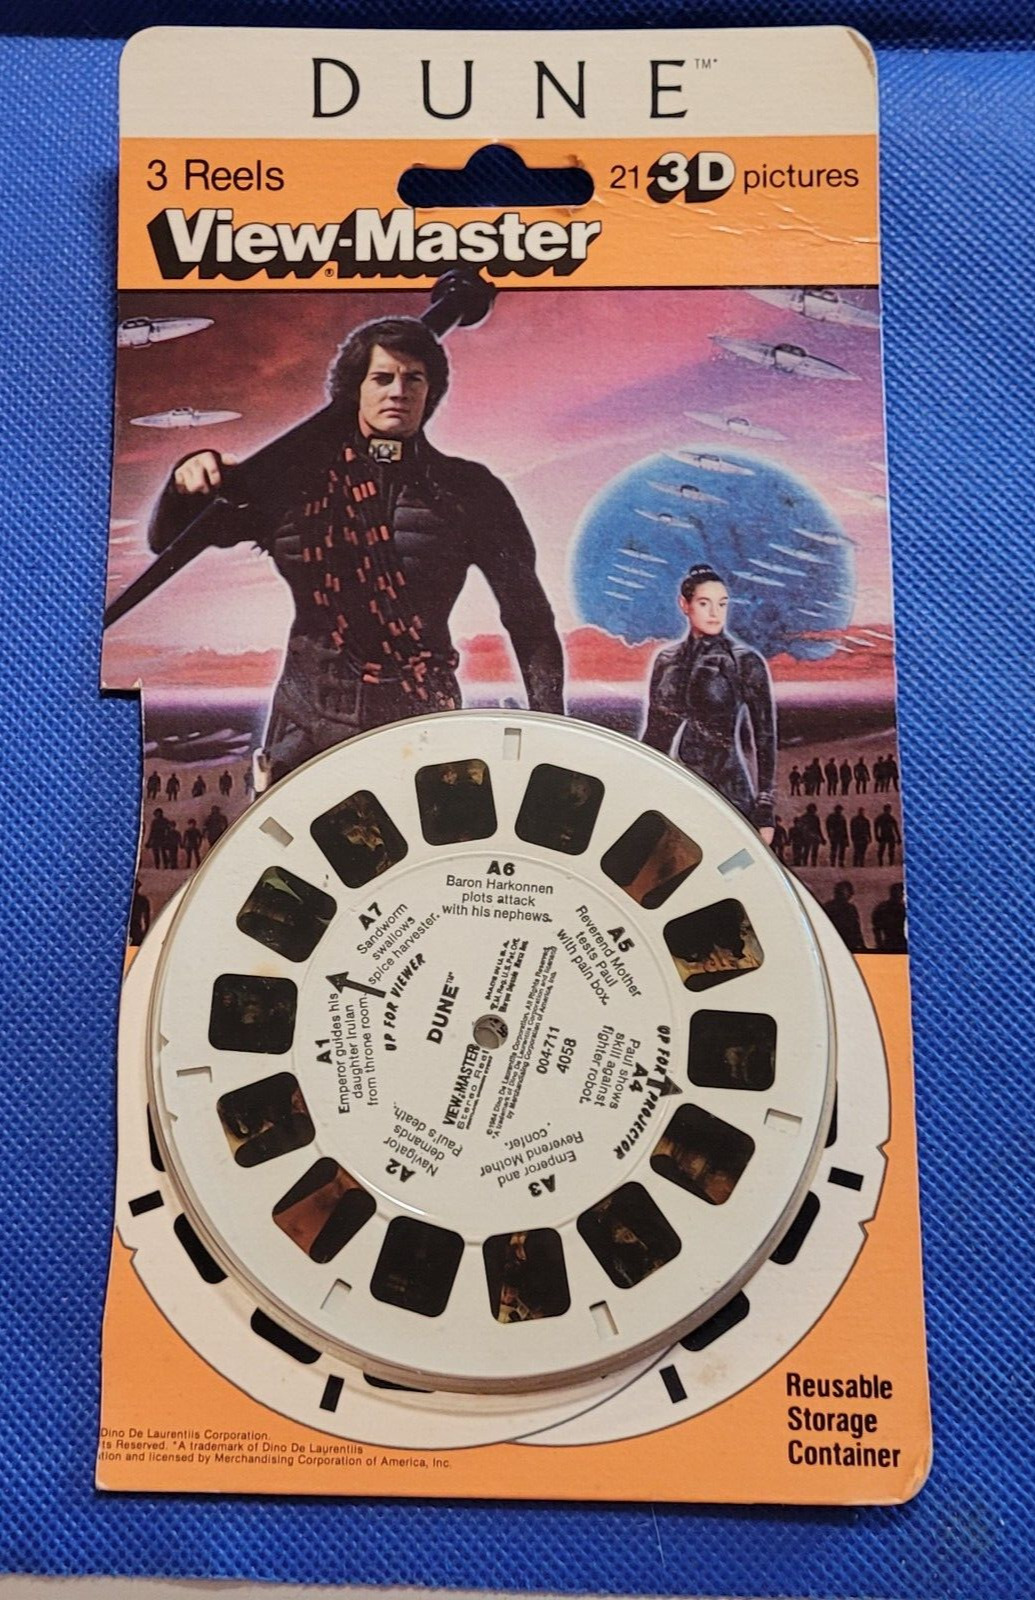 Vintage Dune Movie Sci-Fi Sting MacLachlan Young Madsen view-master 3 Reels Pack